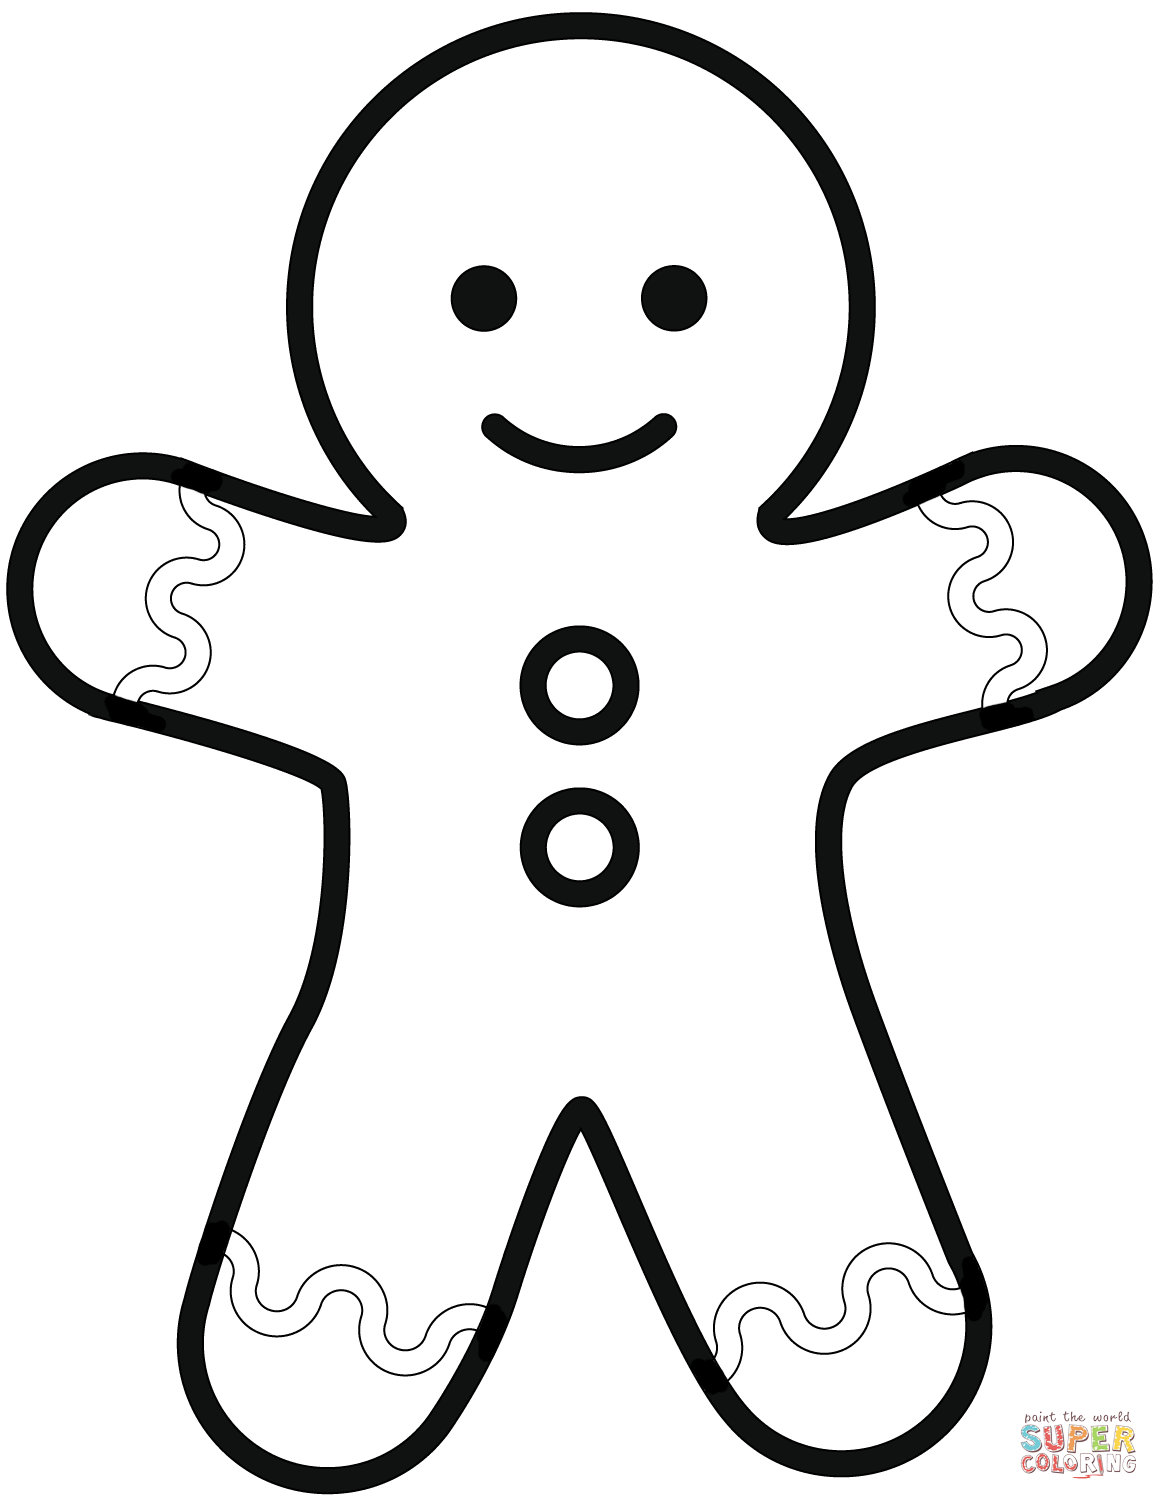 Simple gingerbread man coloring page free printable coloring pages gingerbread man coloring page christmas drawing christmas art